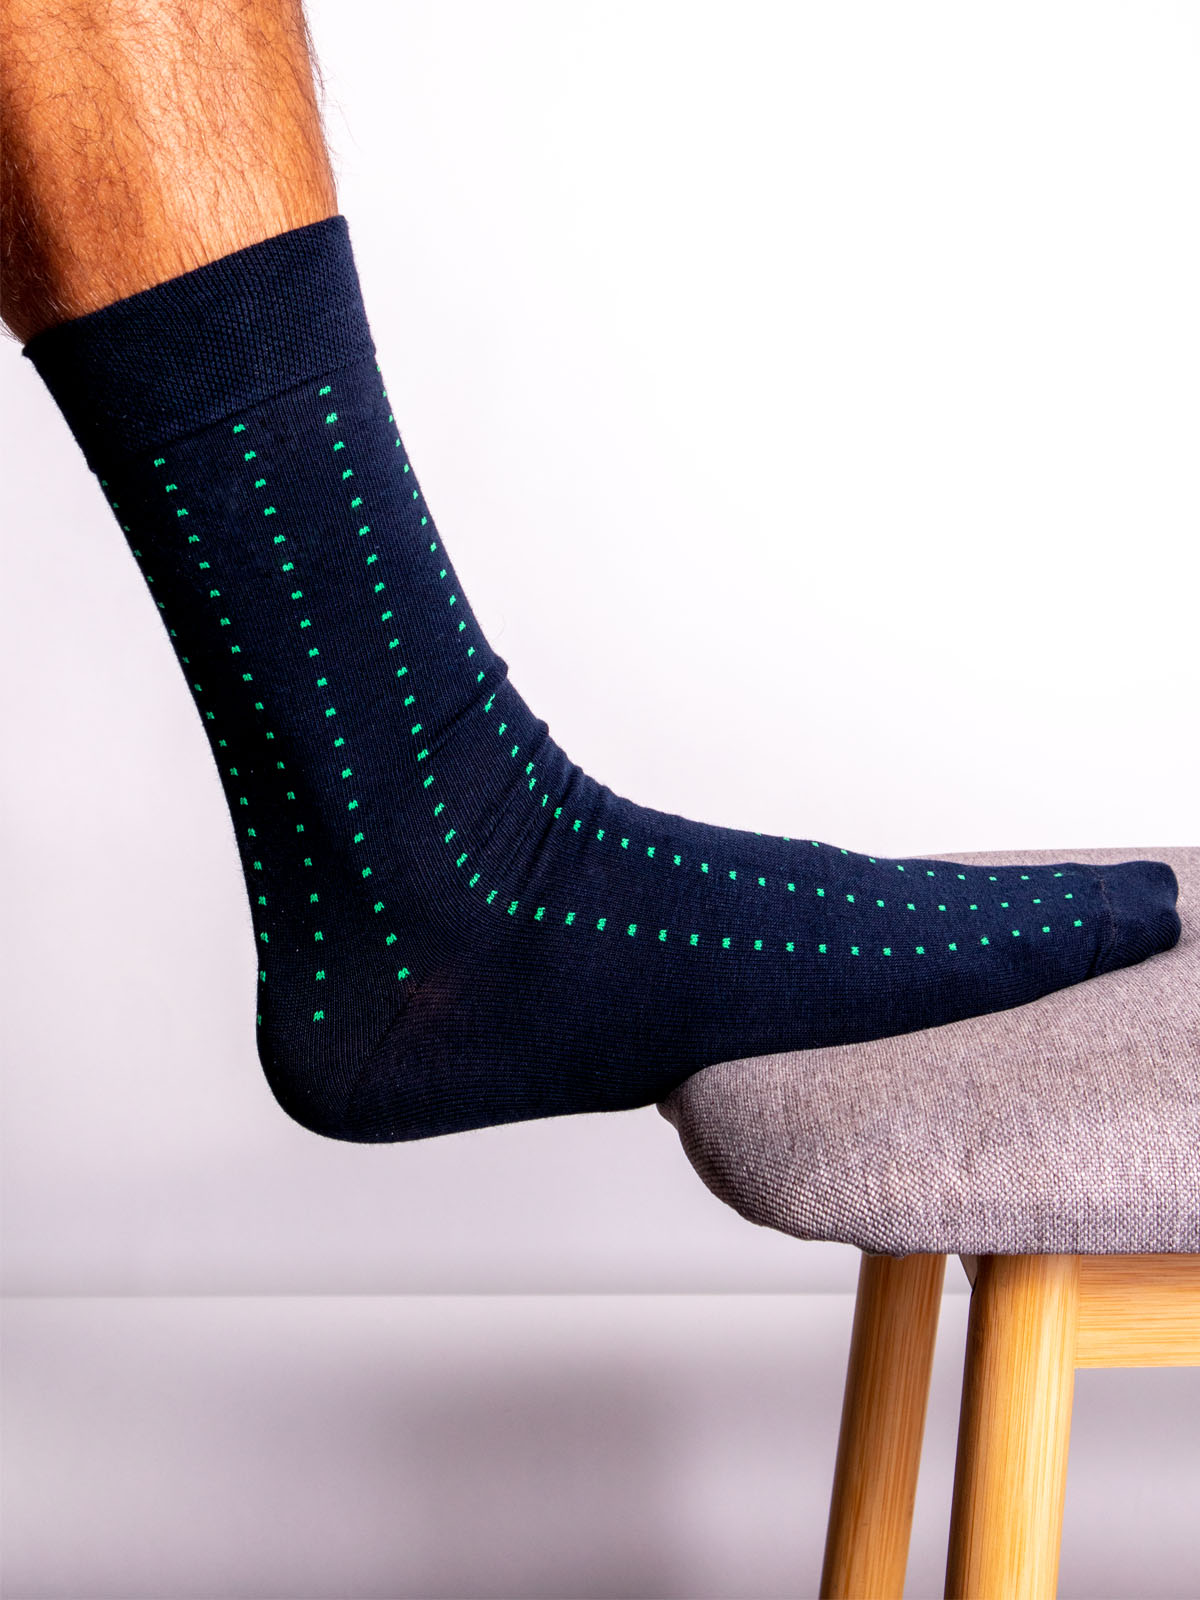 Dark blue socks with green squares - 10525 - € 3.94 img2